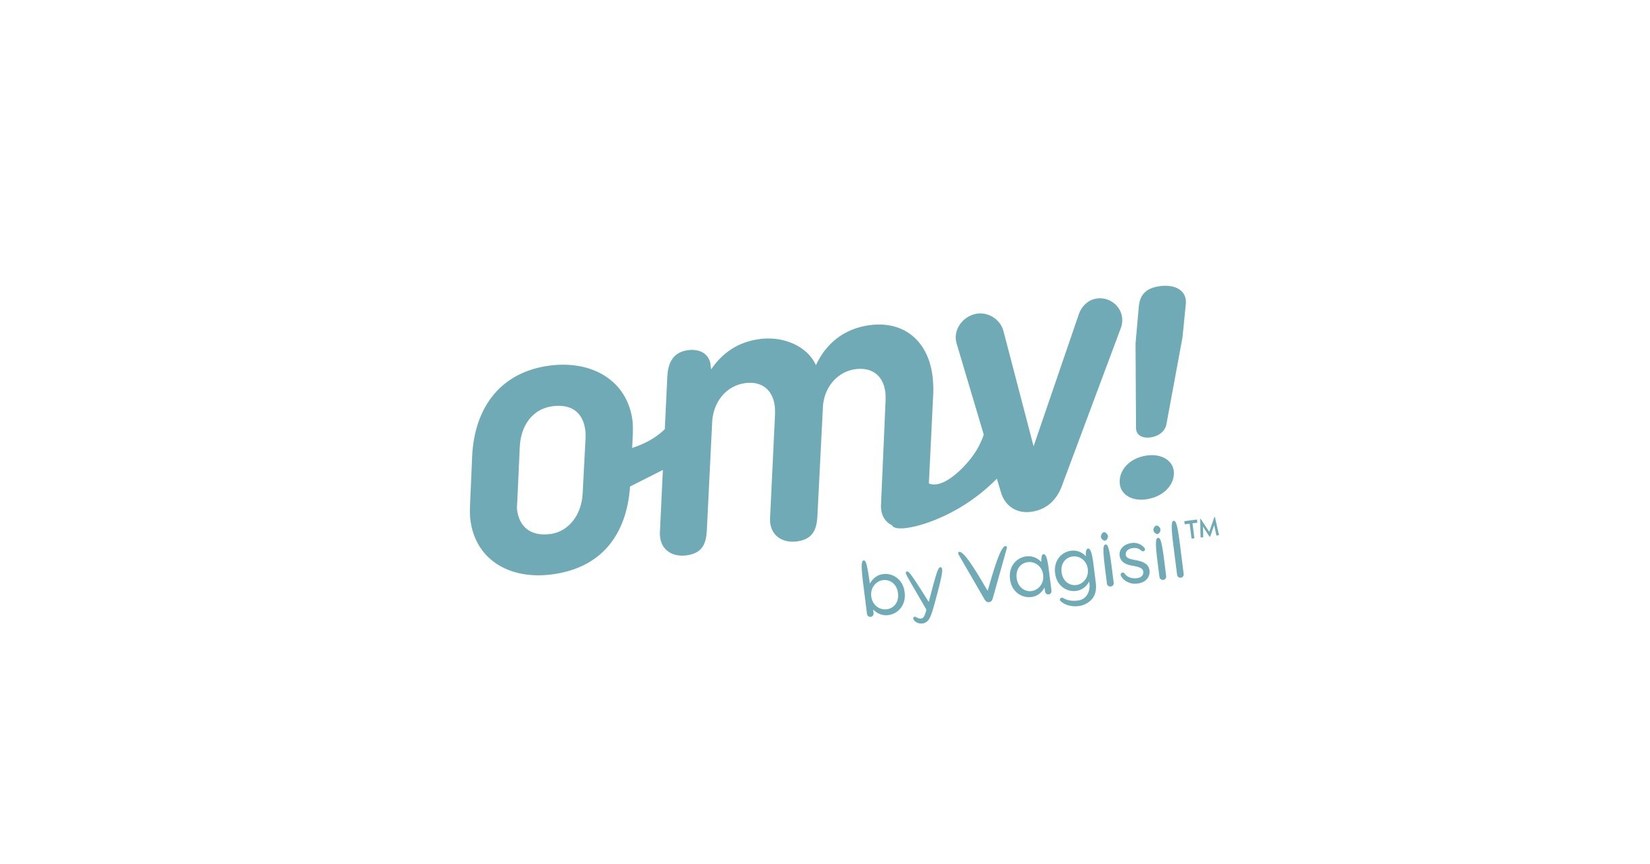 Legacy Brand Vagisil Launches First Teen Focused Intimate Care Line Omv By Vagisil